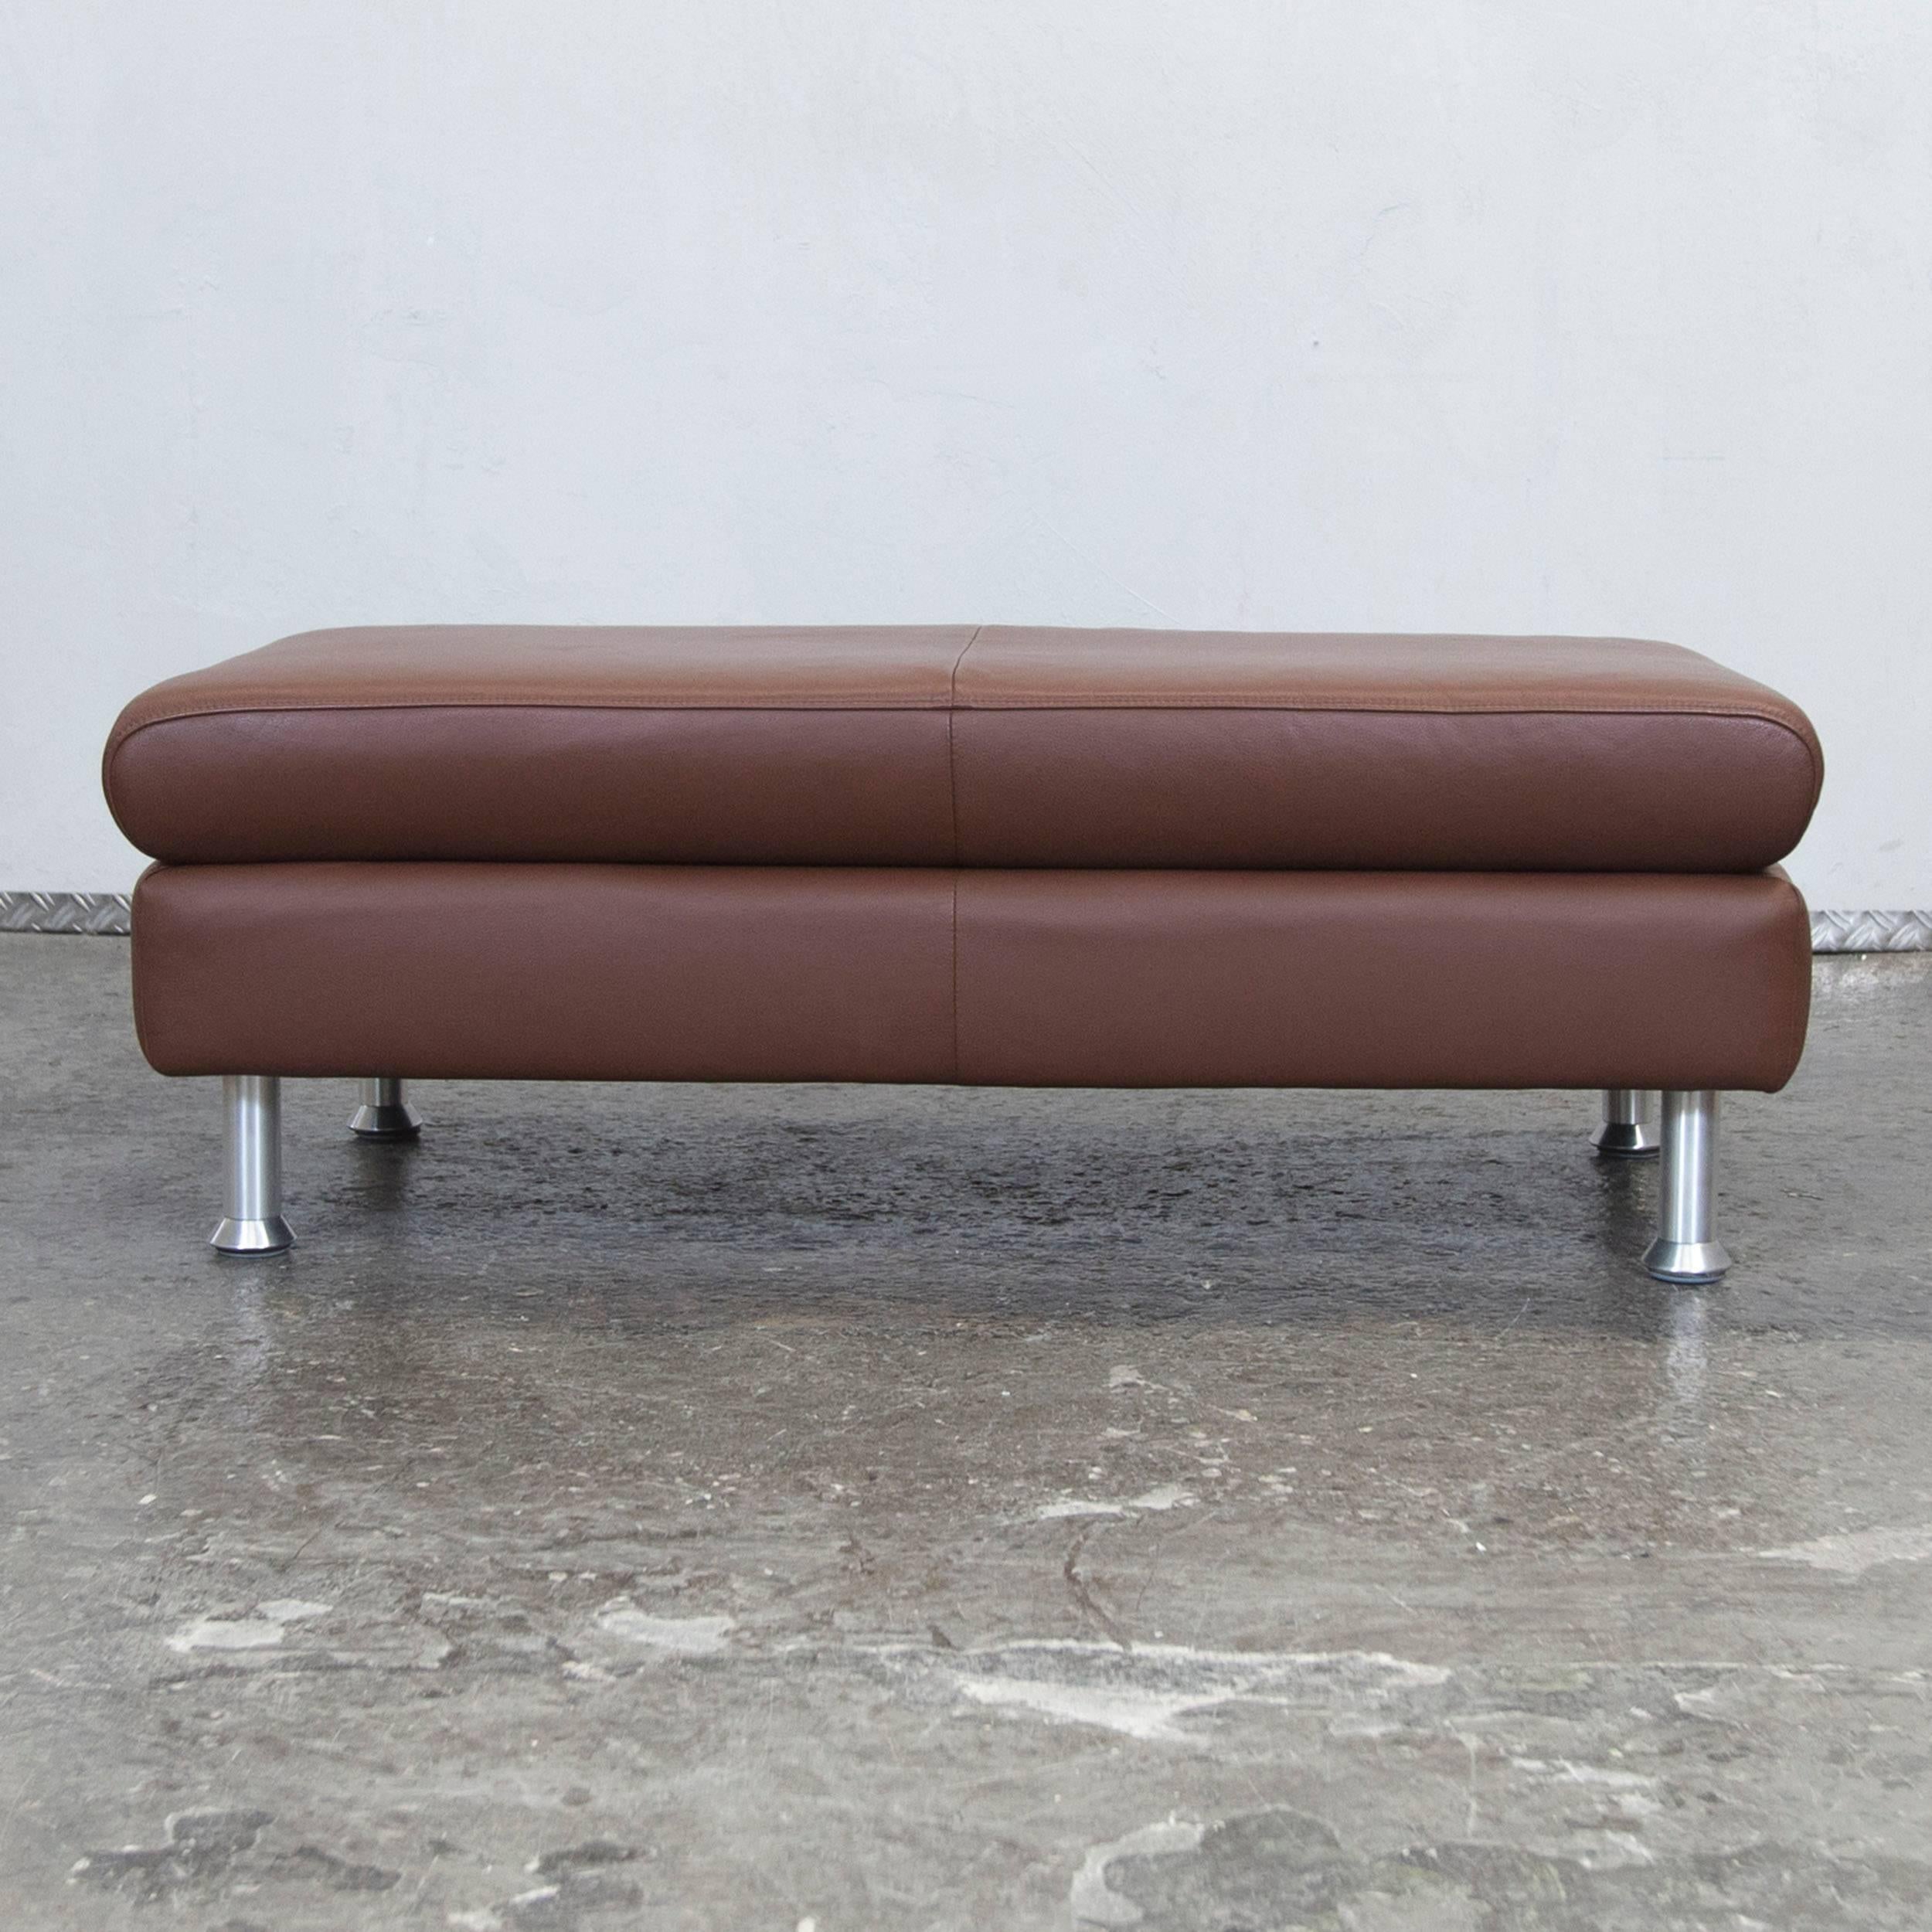 Brown colored designer leather footstool in a modern and minimalistic style, designed for flexible placing and pure comfort.